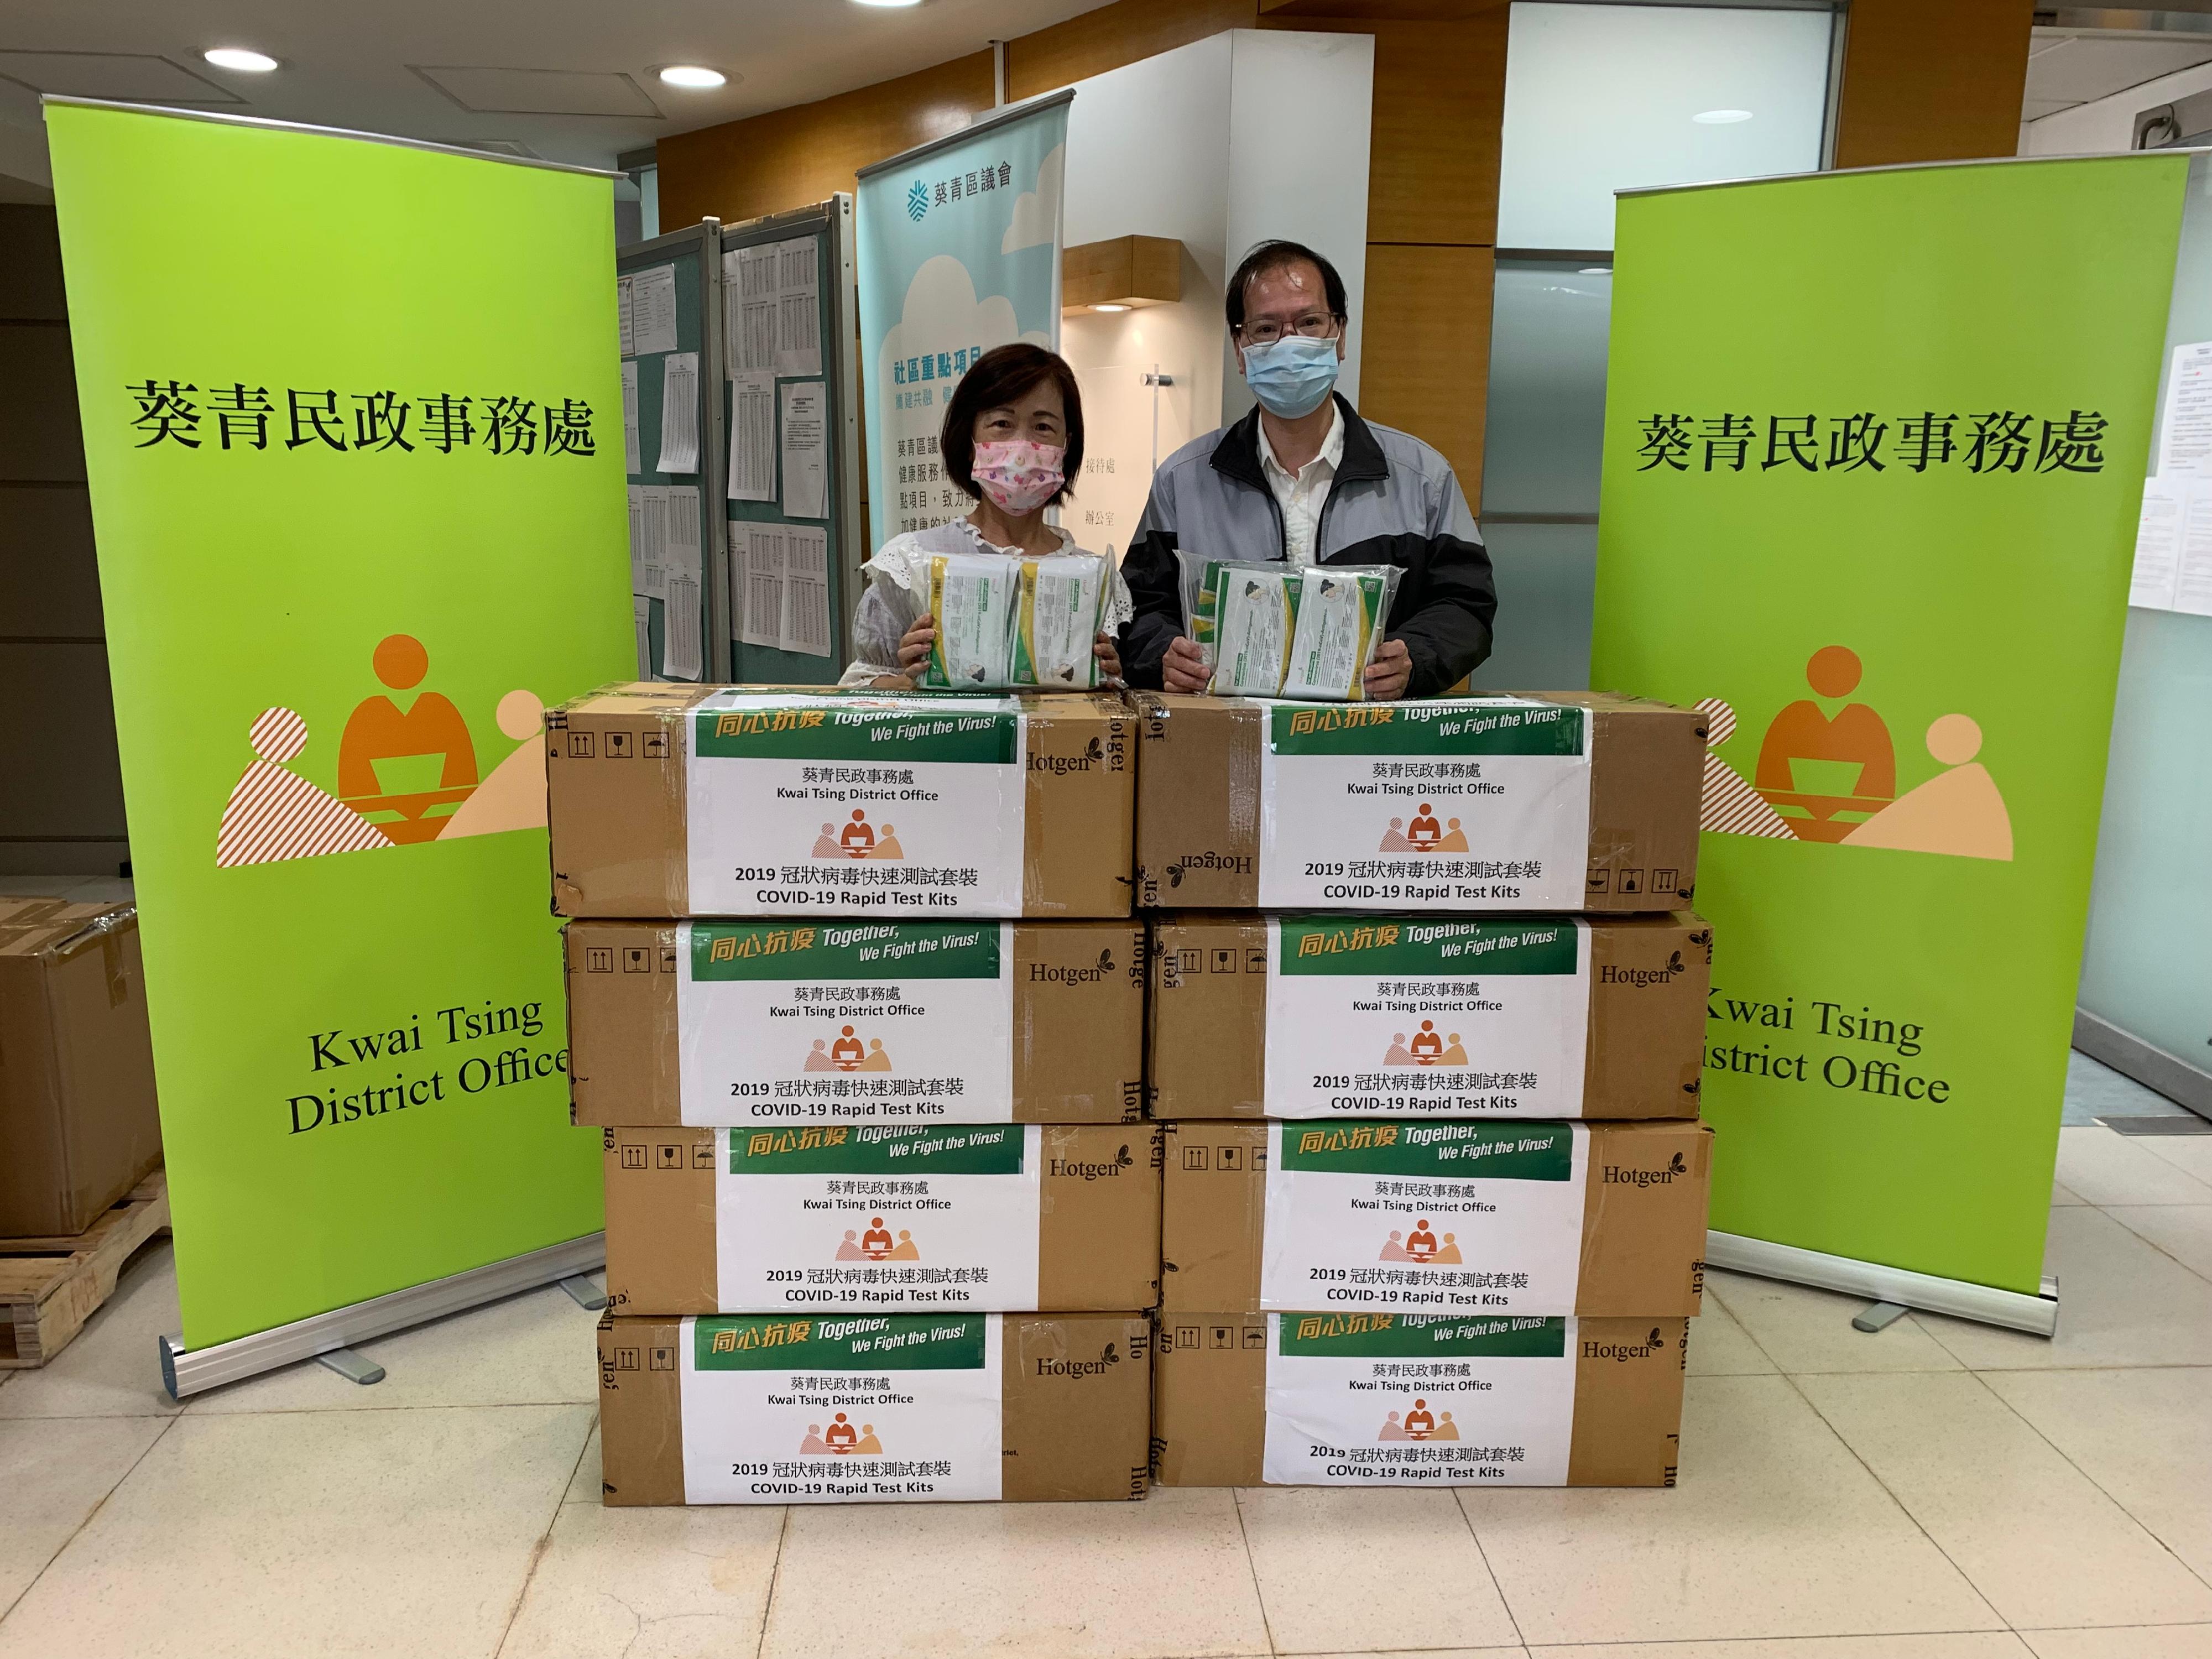 The Kwai Tsing District Office today (May 20) distributed COVID-19 rapid test kits to households, cleansing workers and property management staff living and working in Ning Fung Court for voluntary testing through the property management company.